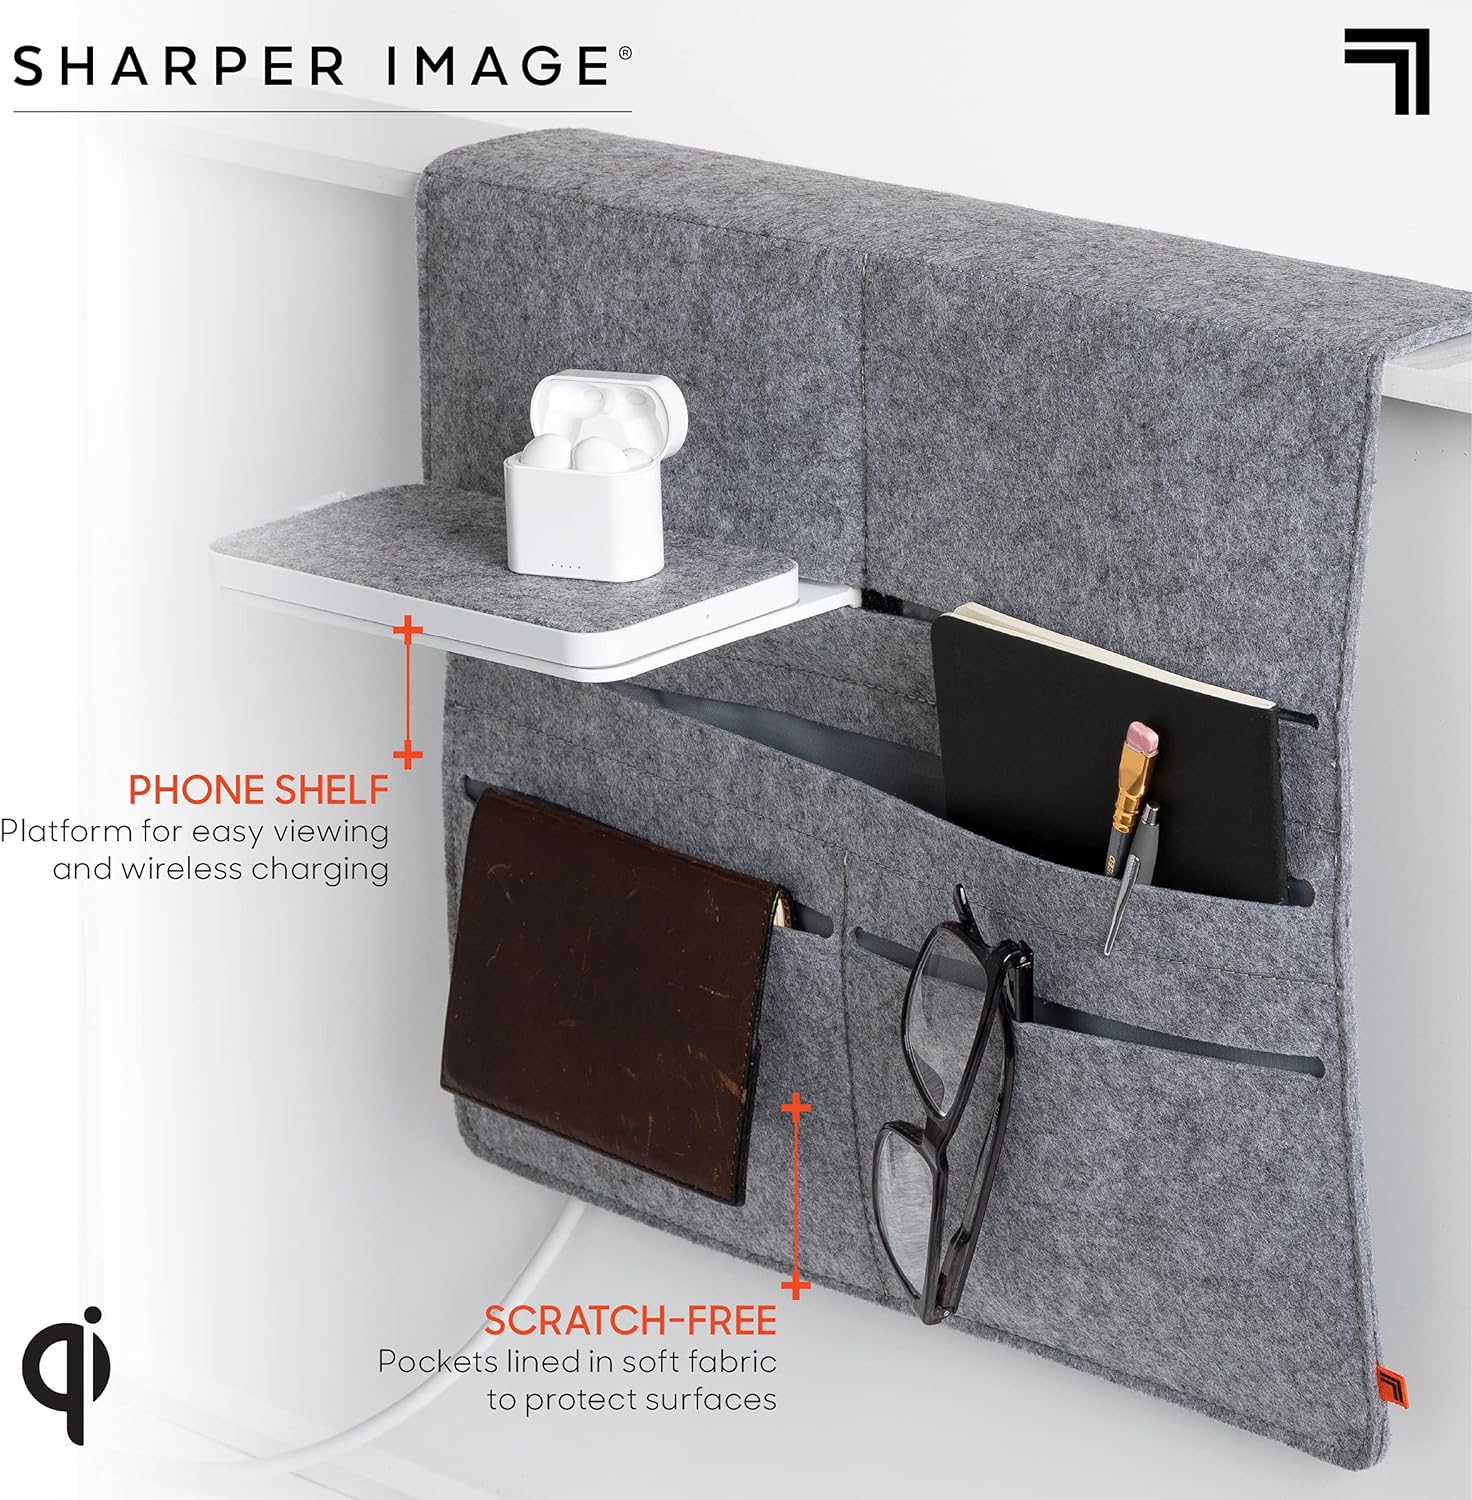 Wireless Qi Charging Bedside Caddy, Hanging Organizer with 5 Pockets & Phone Shelf